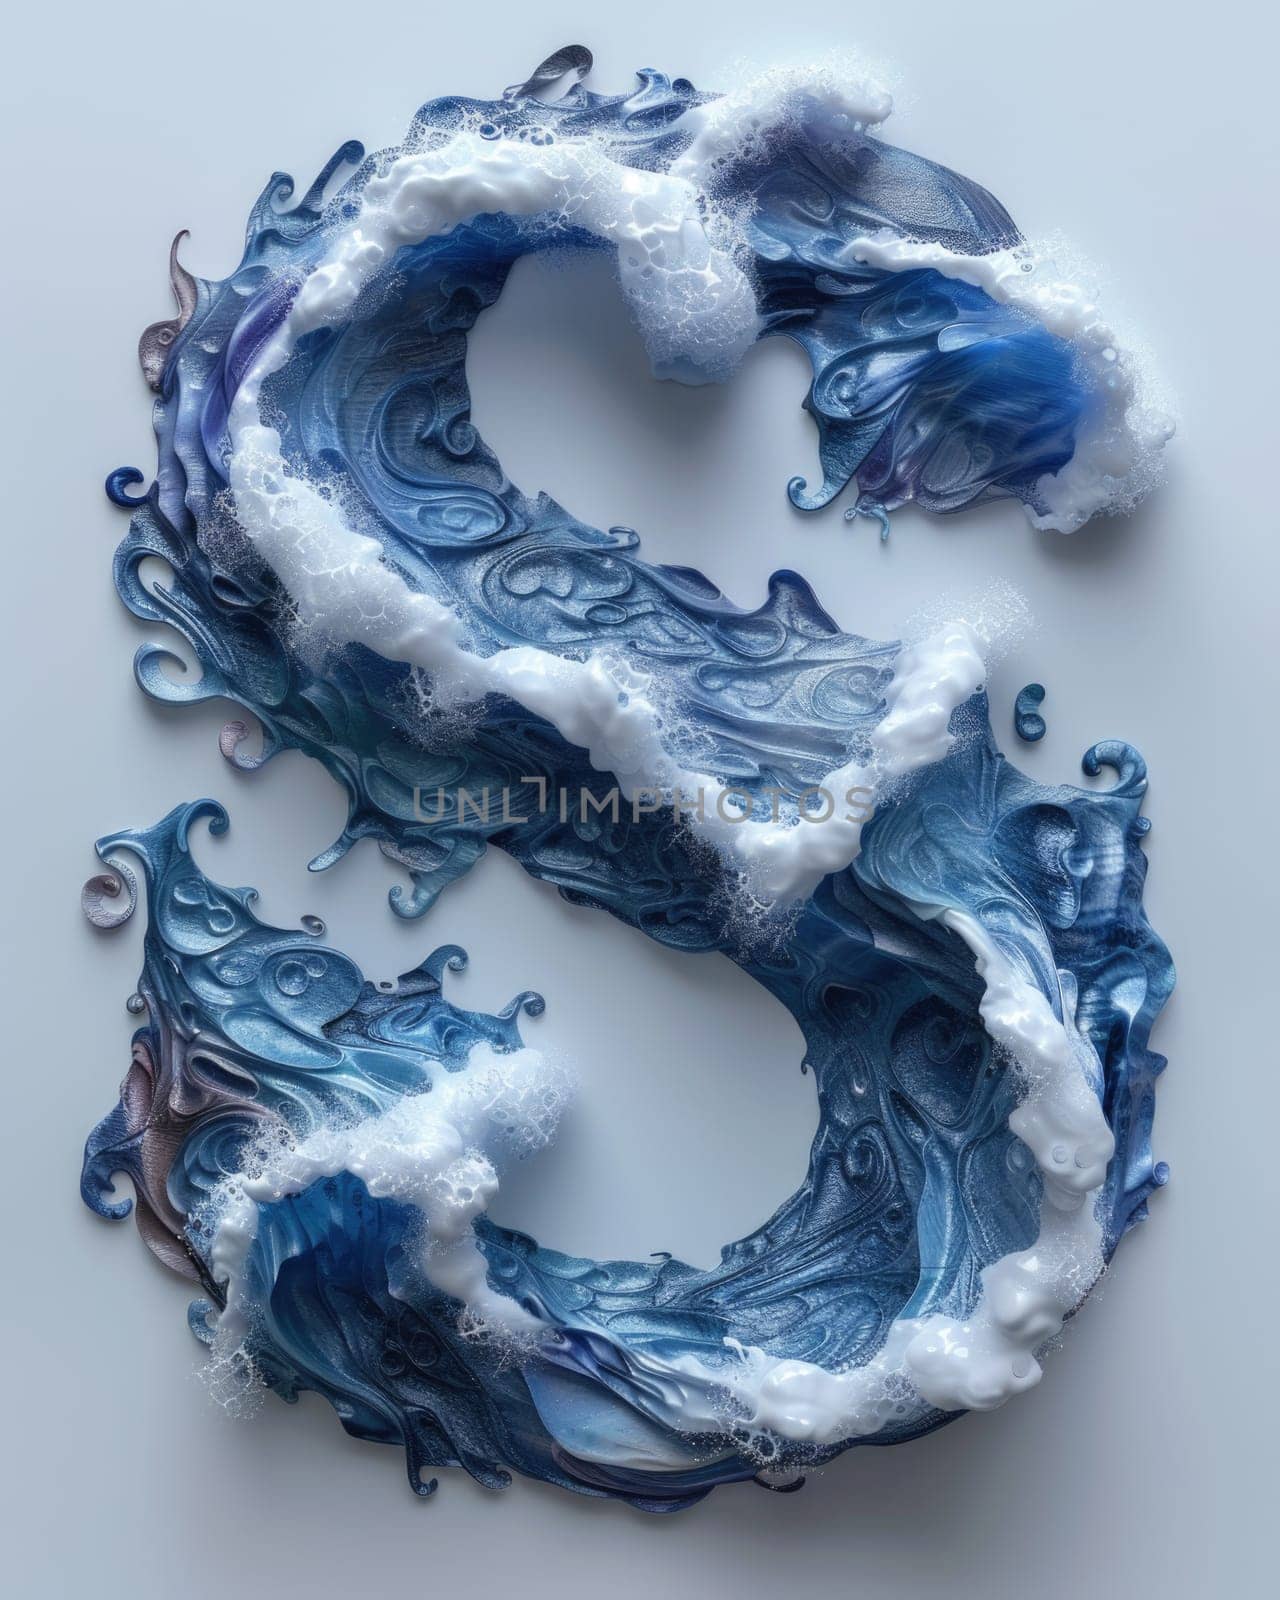 The letter S is creatively crafted using blue and white swirls, resembling the form of the sea.